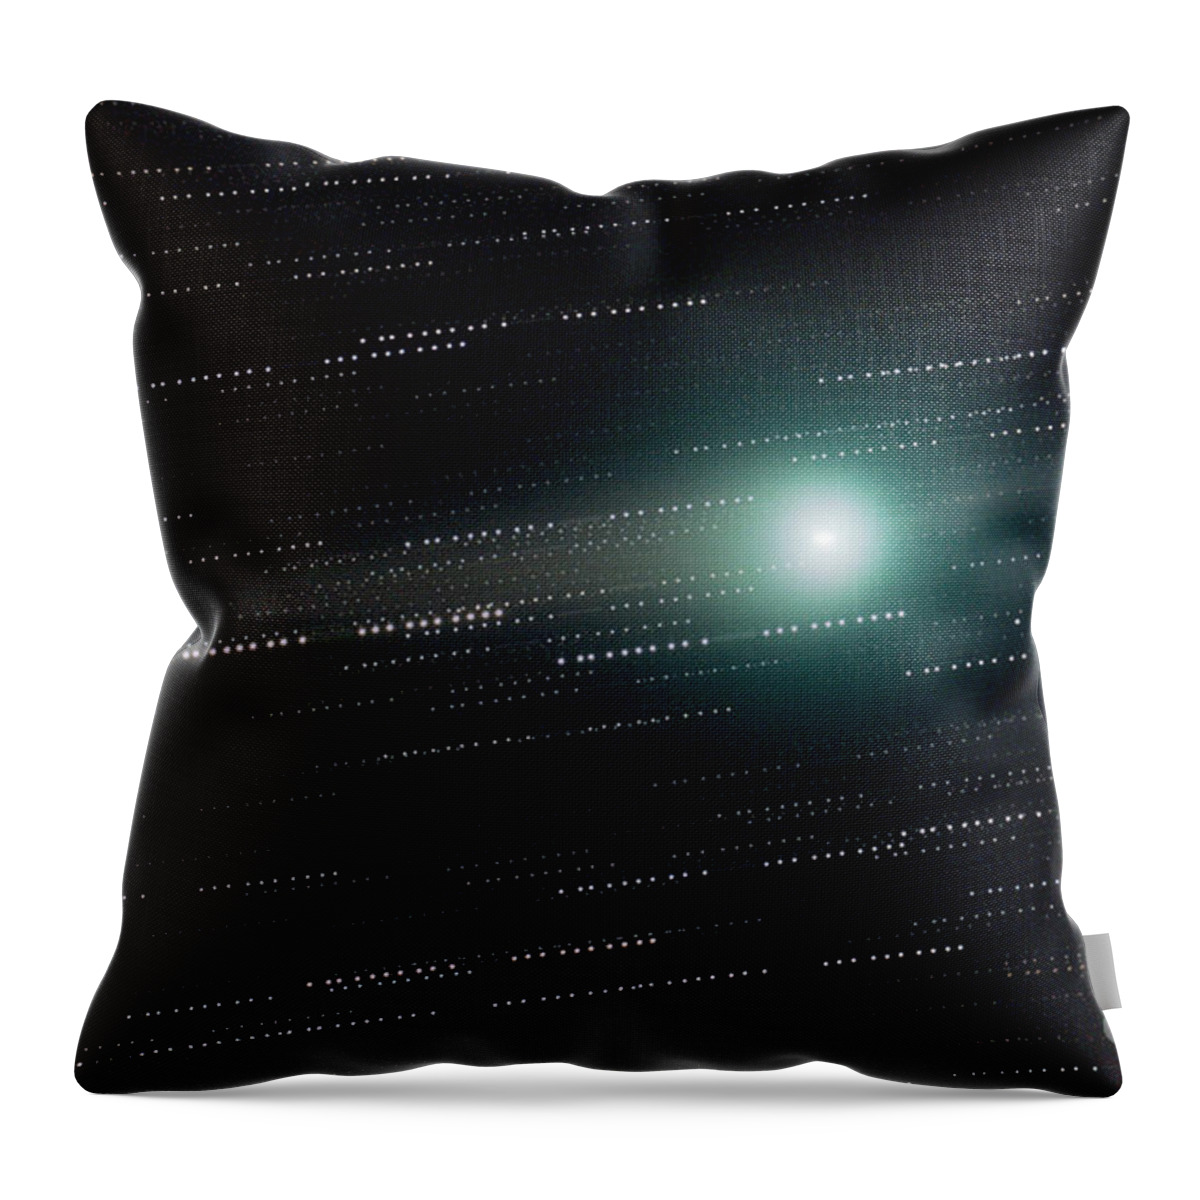 Astronomy Throw Pillow featuring the photograph Comet Lulin by John Chumack